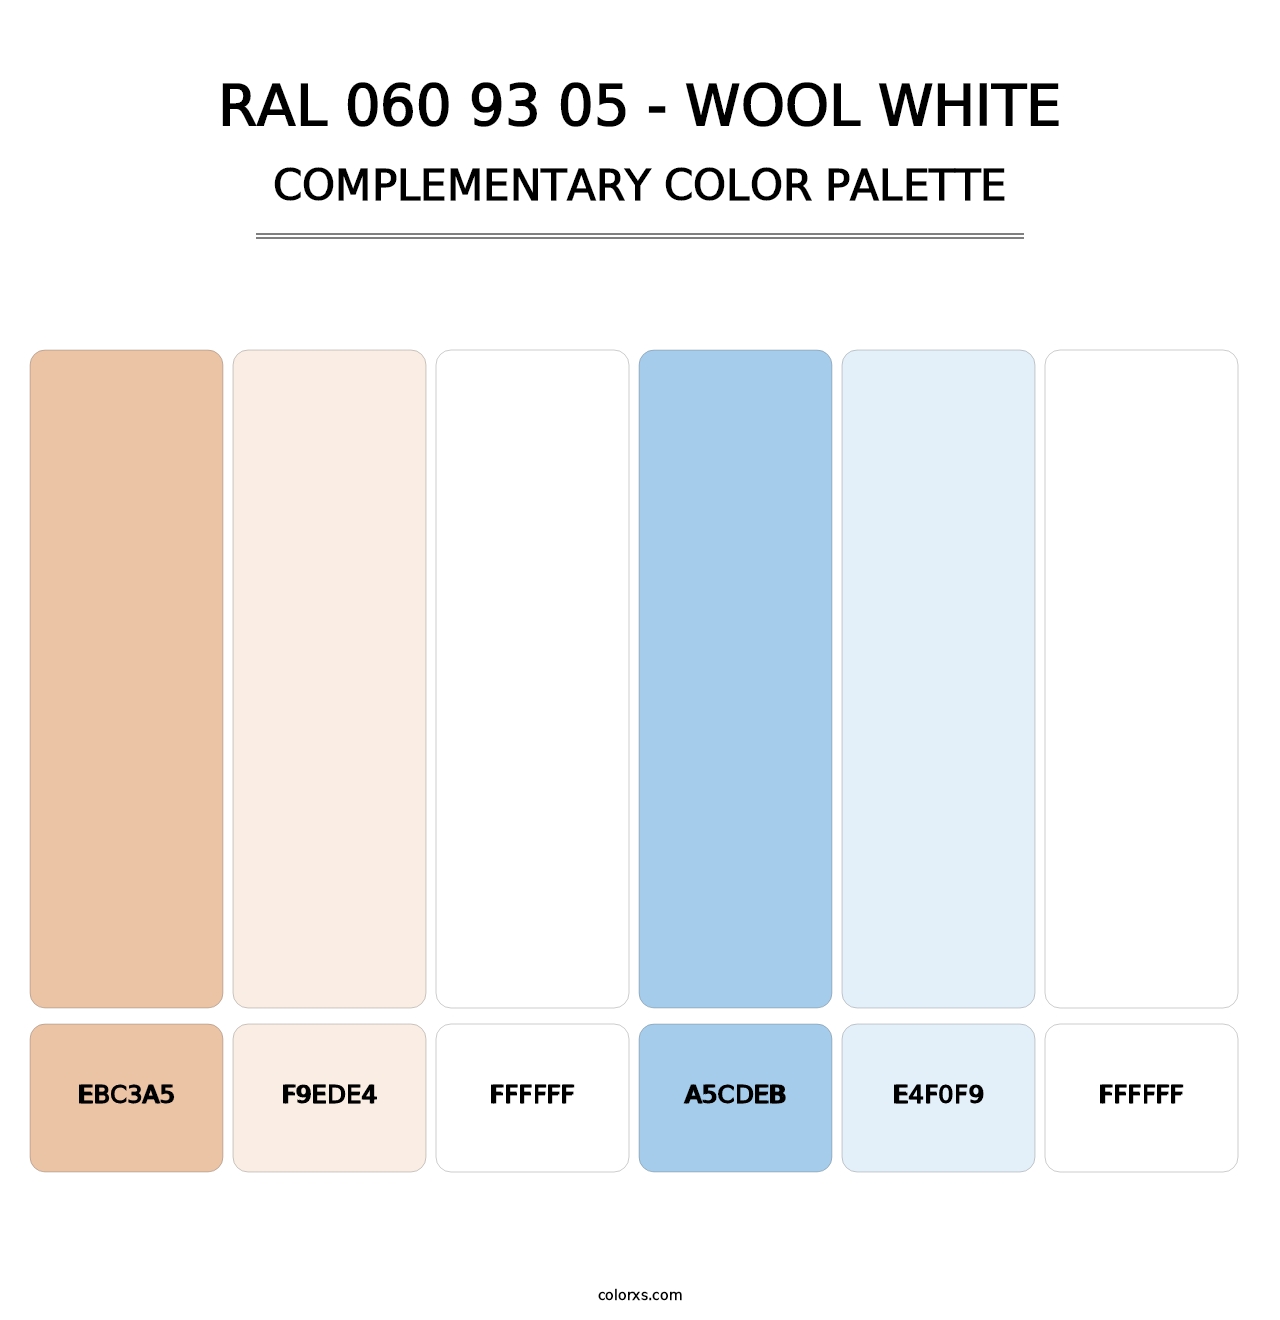 RAL 060 93 05 - Wool White - Complementary Color Palette